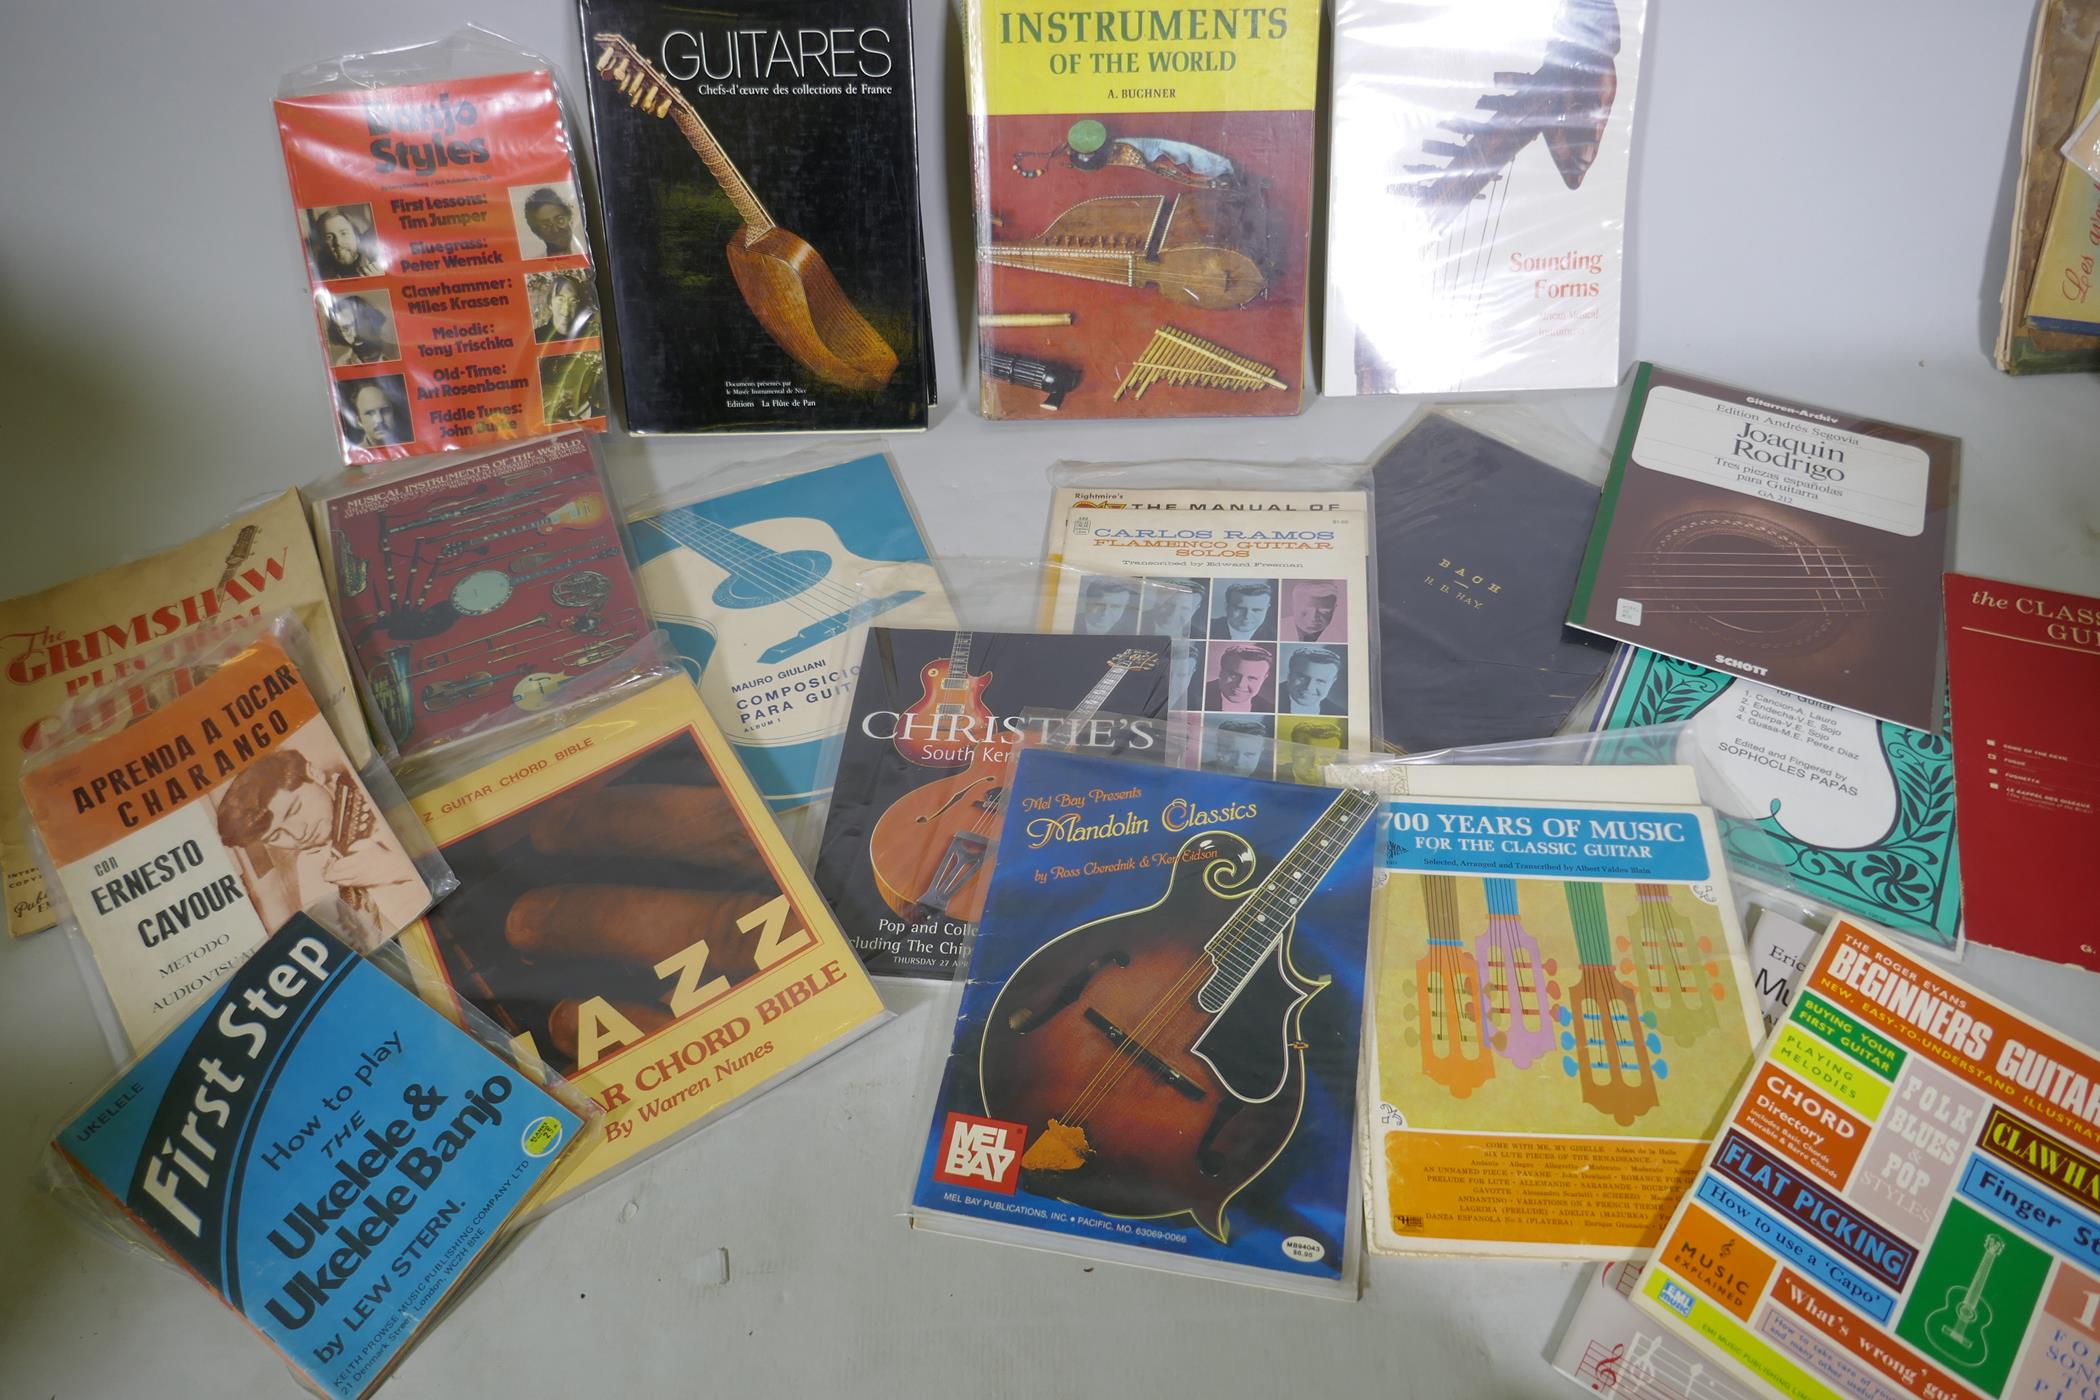 A collection of books, musical instruments, folk and African, guitars and instruction manuals